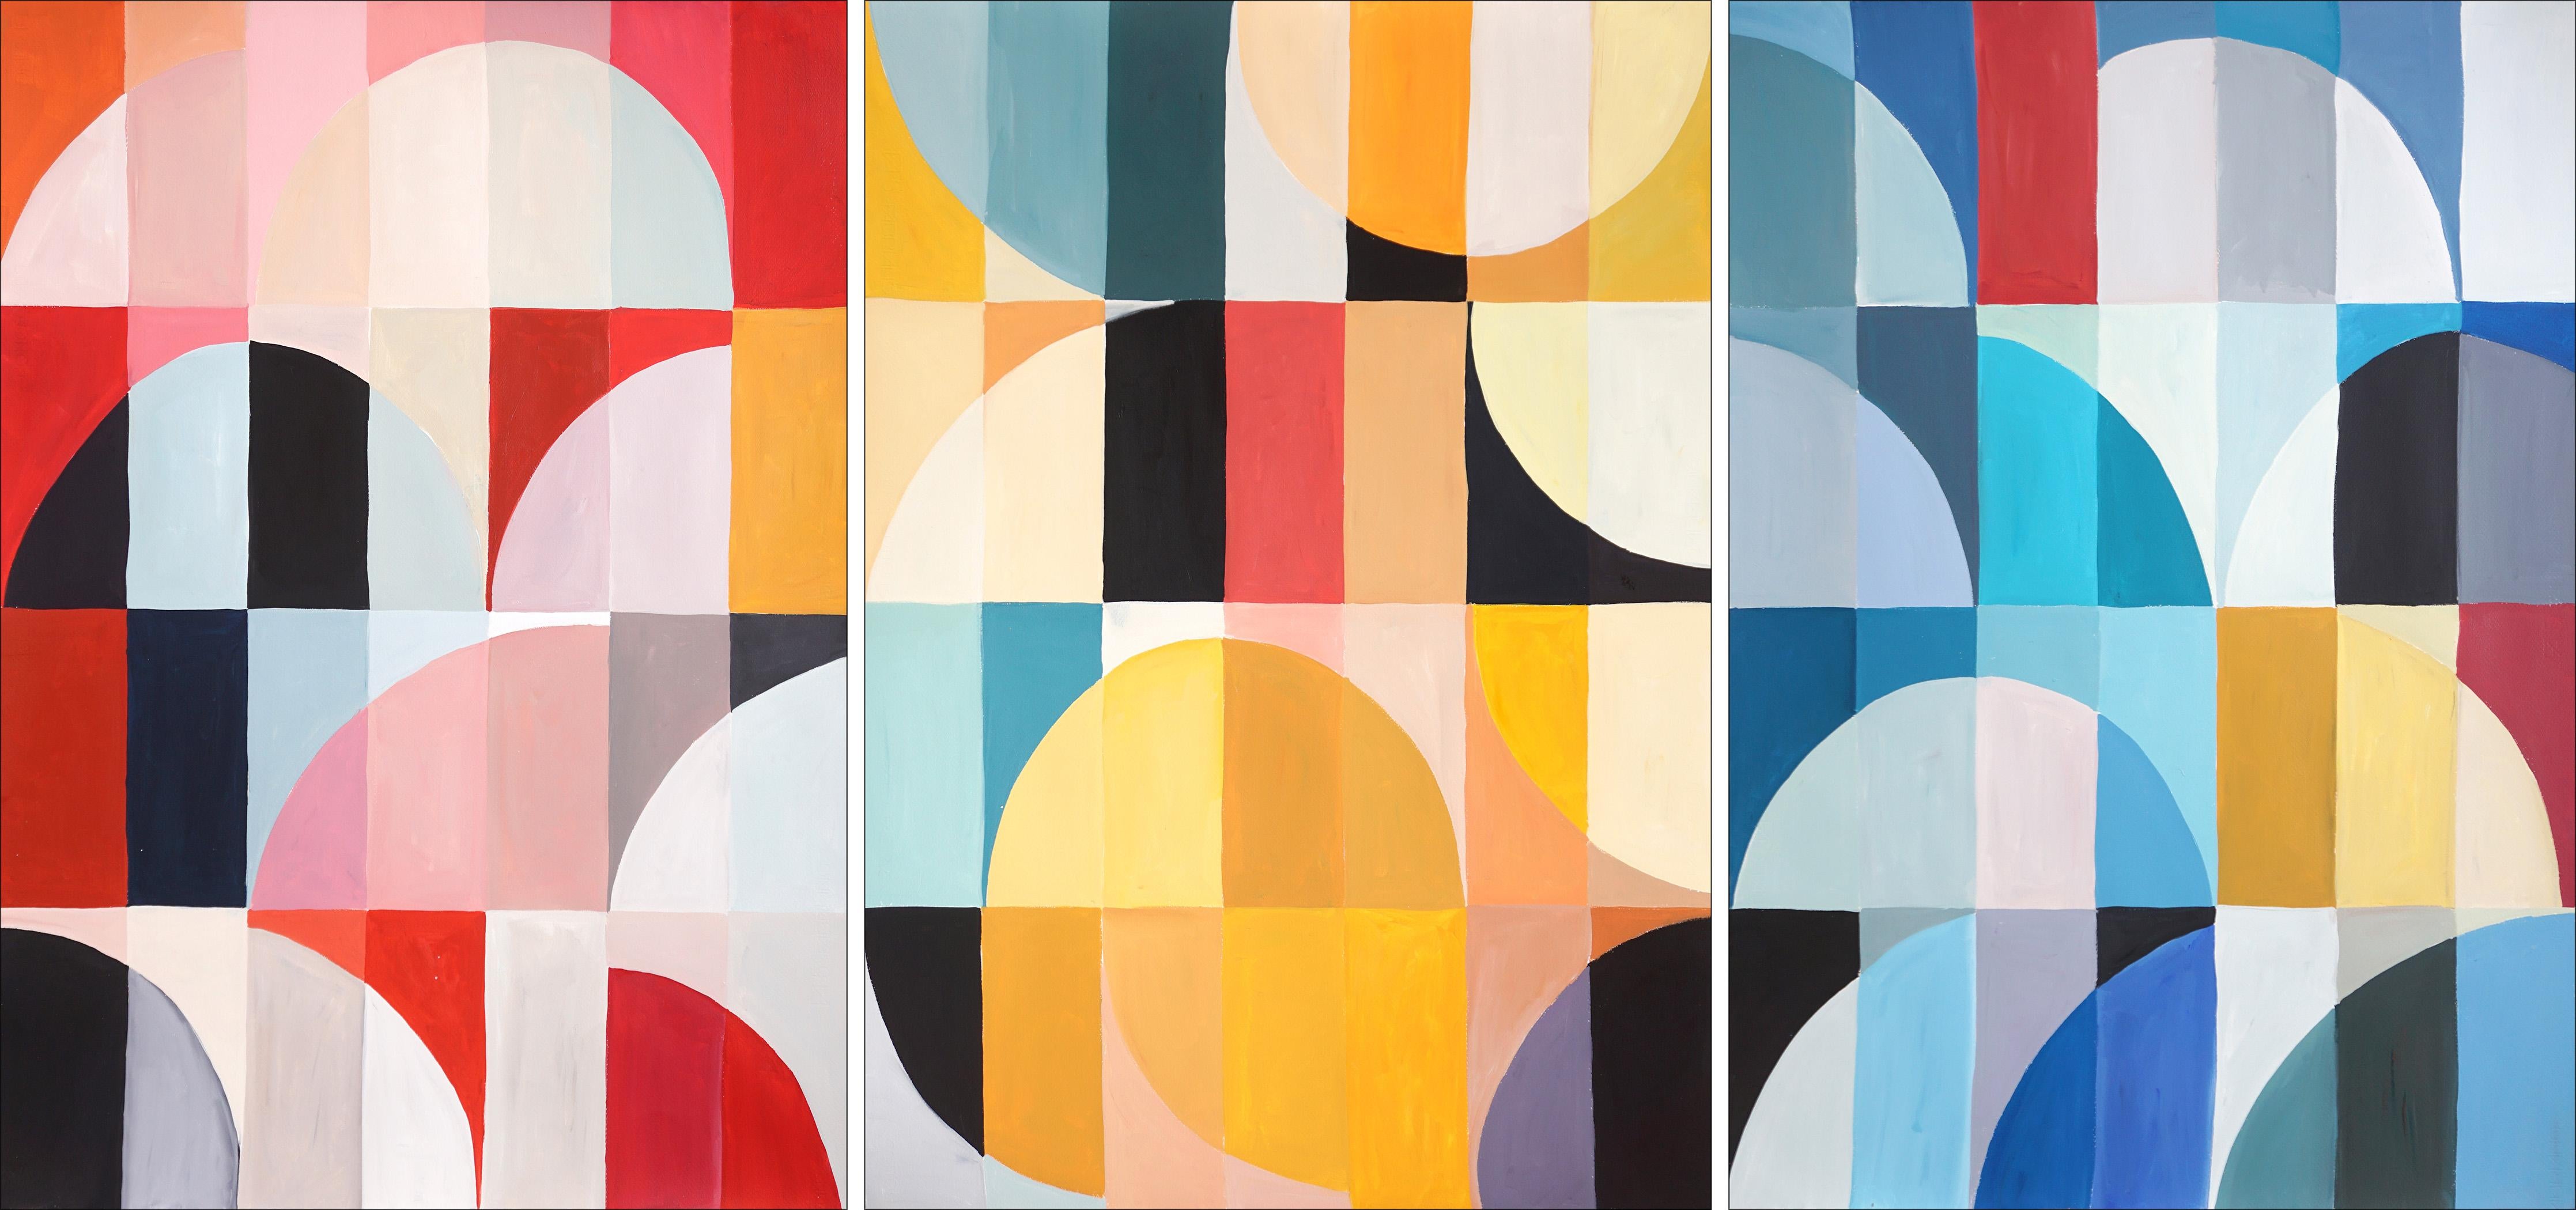 Natalia Roman Landscape Painting - Primary Tones Umbrella Shades, Yellow, Blue and Red Bauhaus Grid Large Triptych